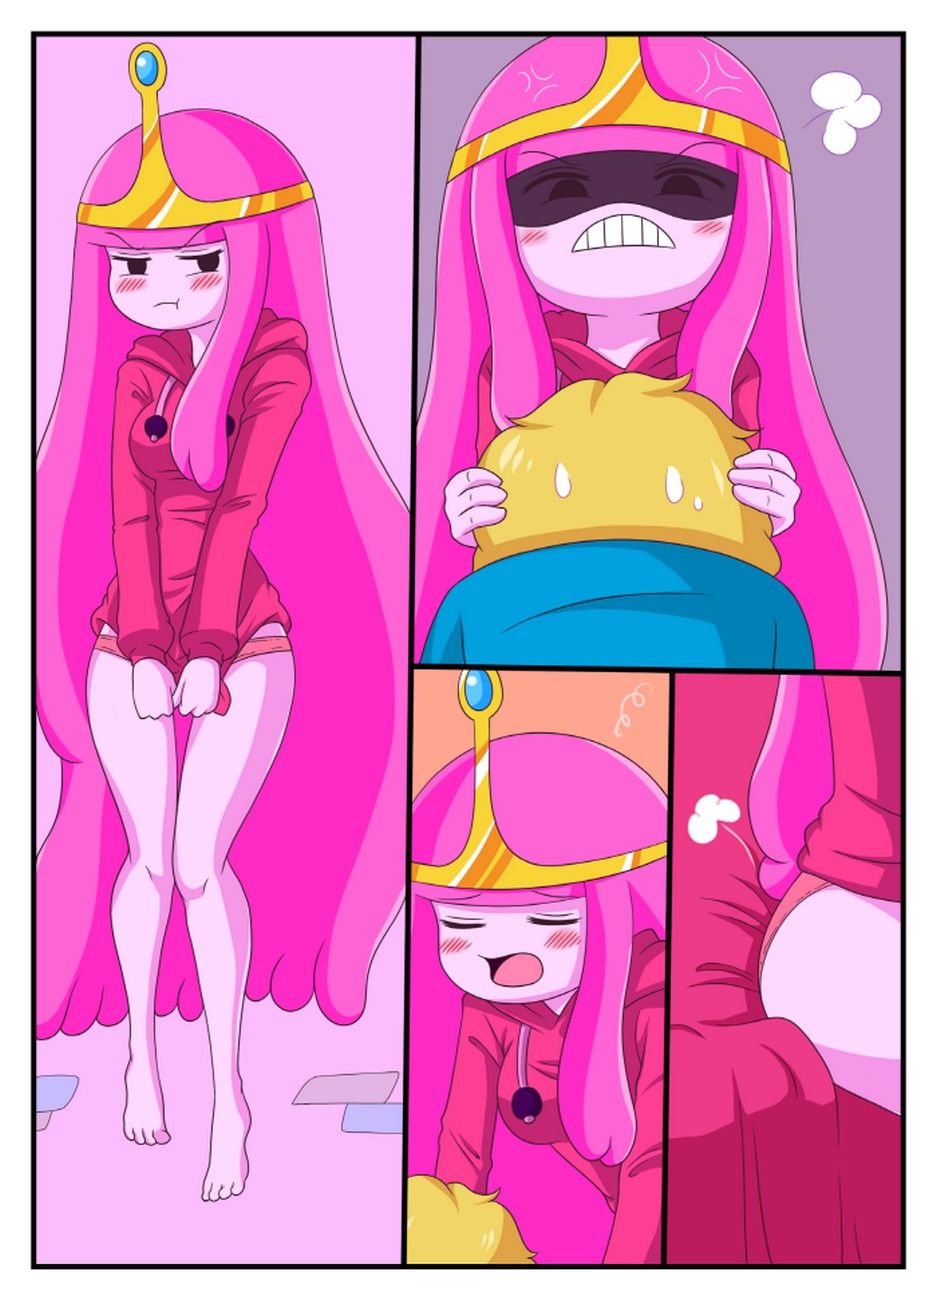 Adventure_Time_-_Adult_Time_1 comix_43440.jpg